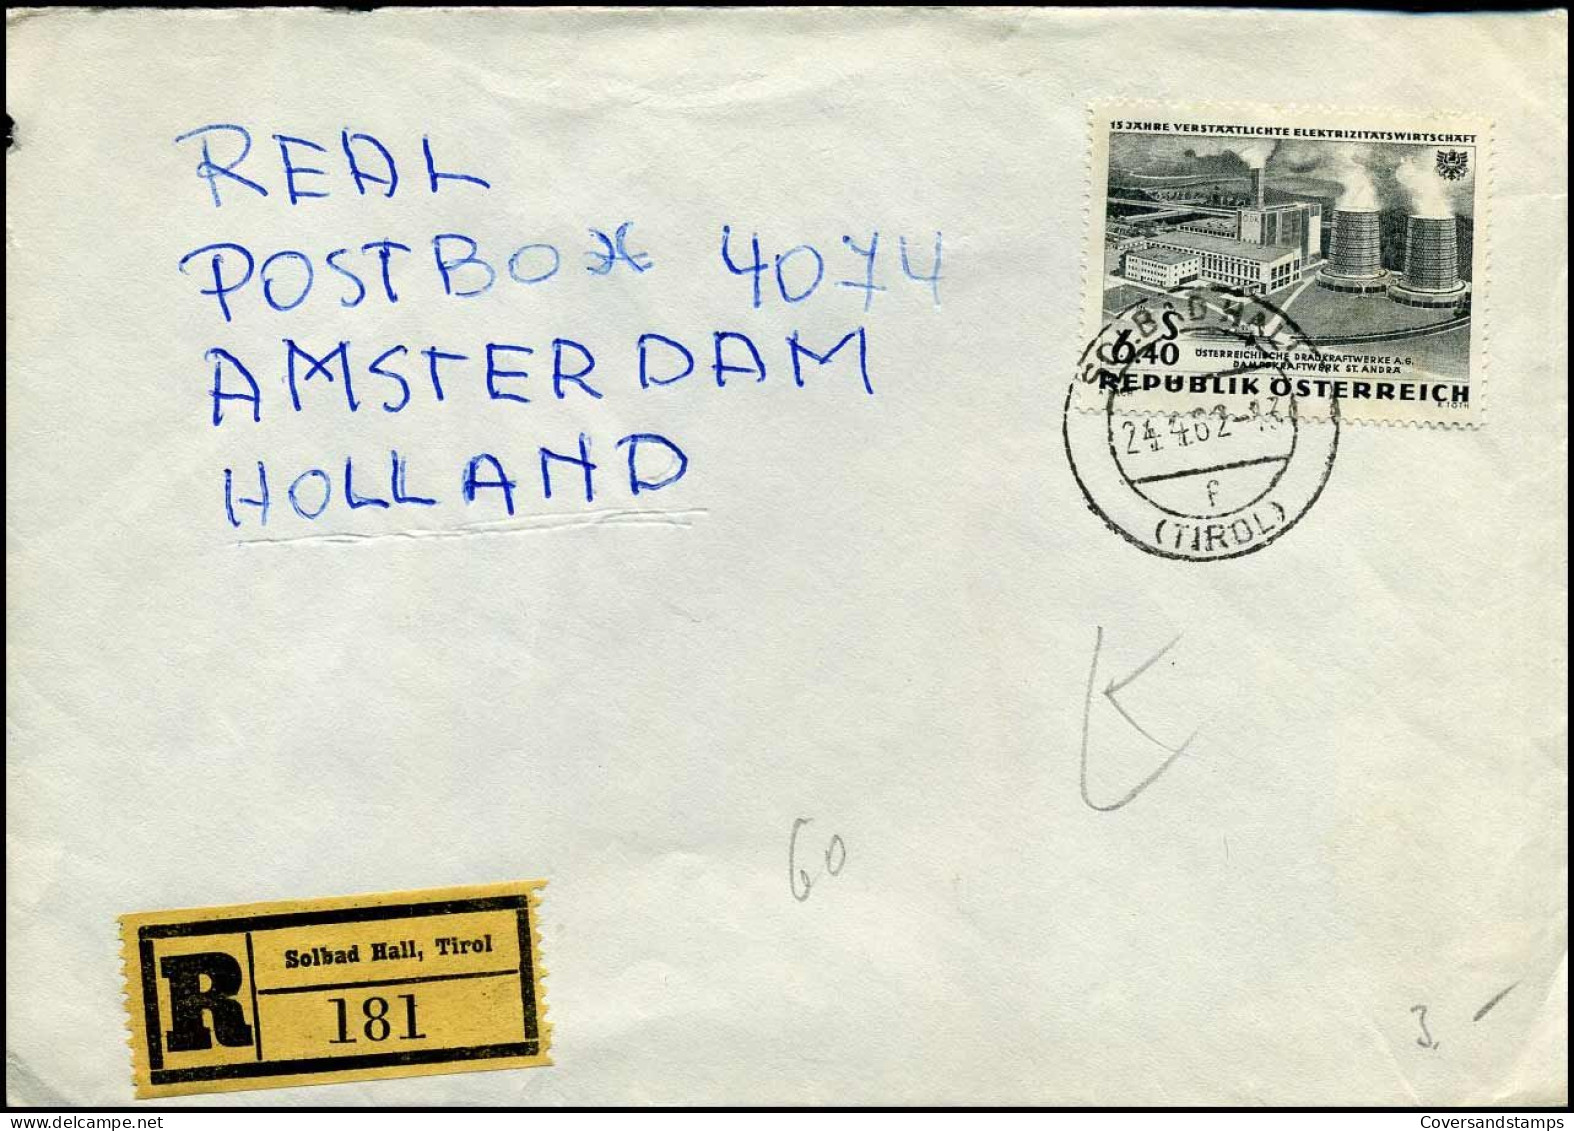 Registered Cover To Amsterdam, Netherlands - Covers & Documents